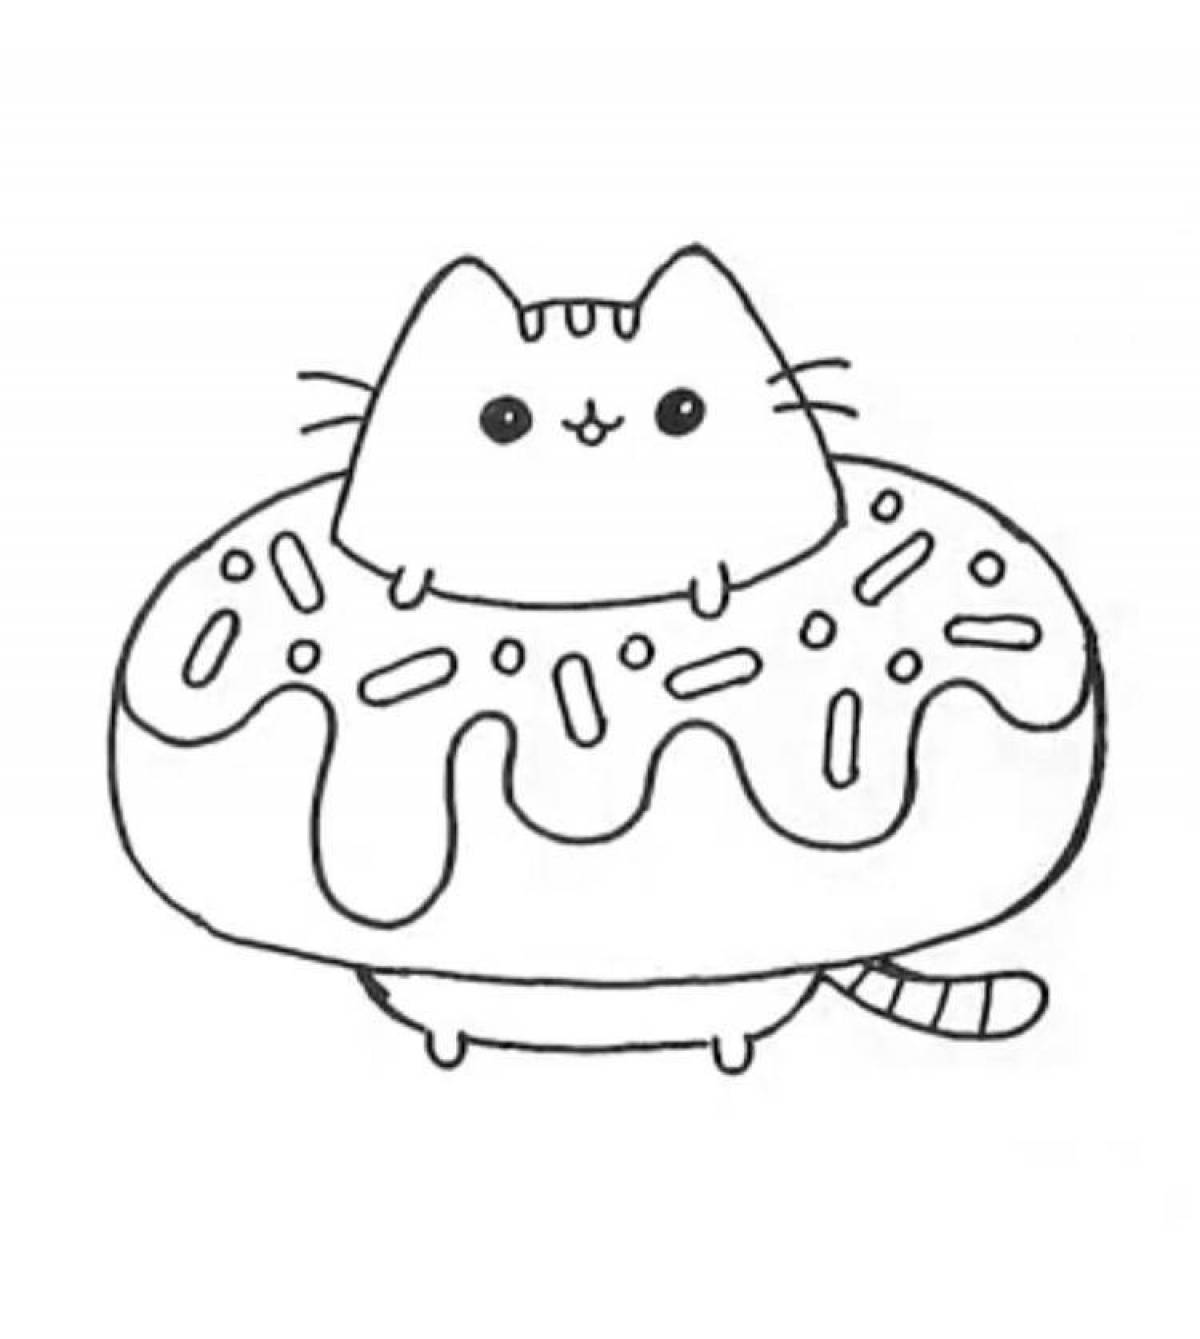 Cute and quirky cat coloring book